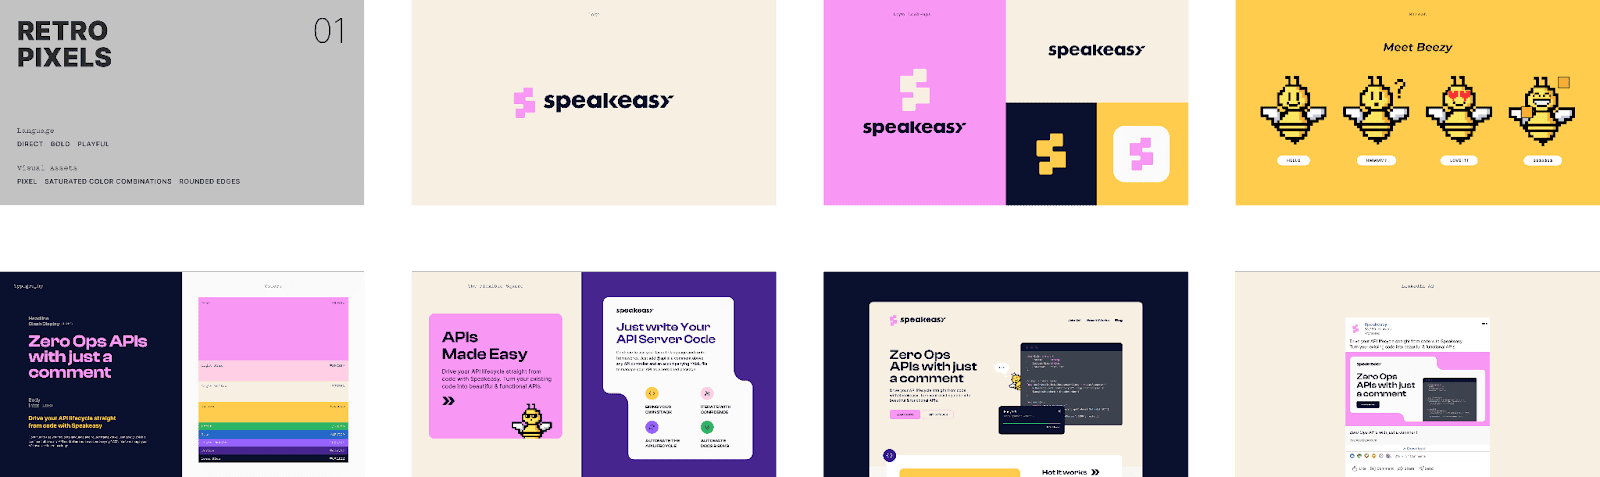 Eighth variations of different web pages with different colors and designs for Speakeasy.